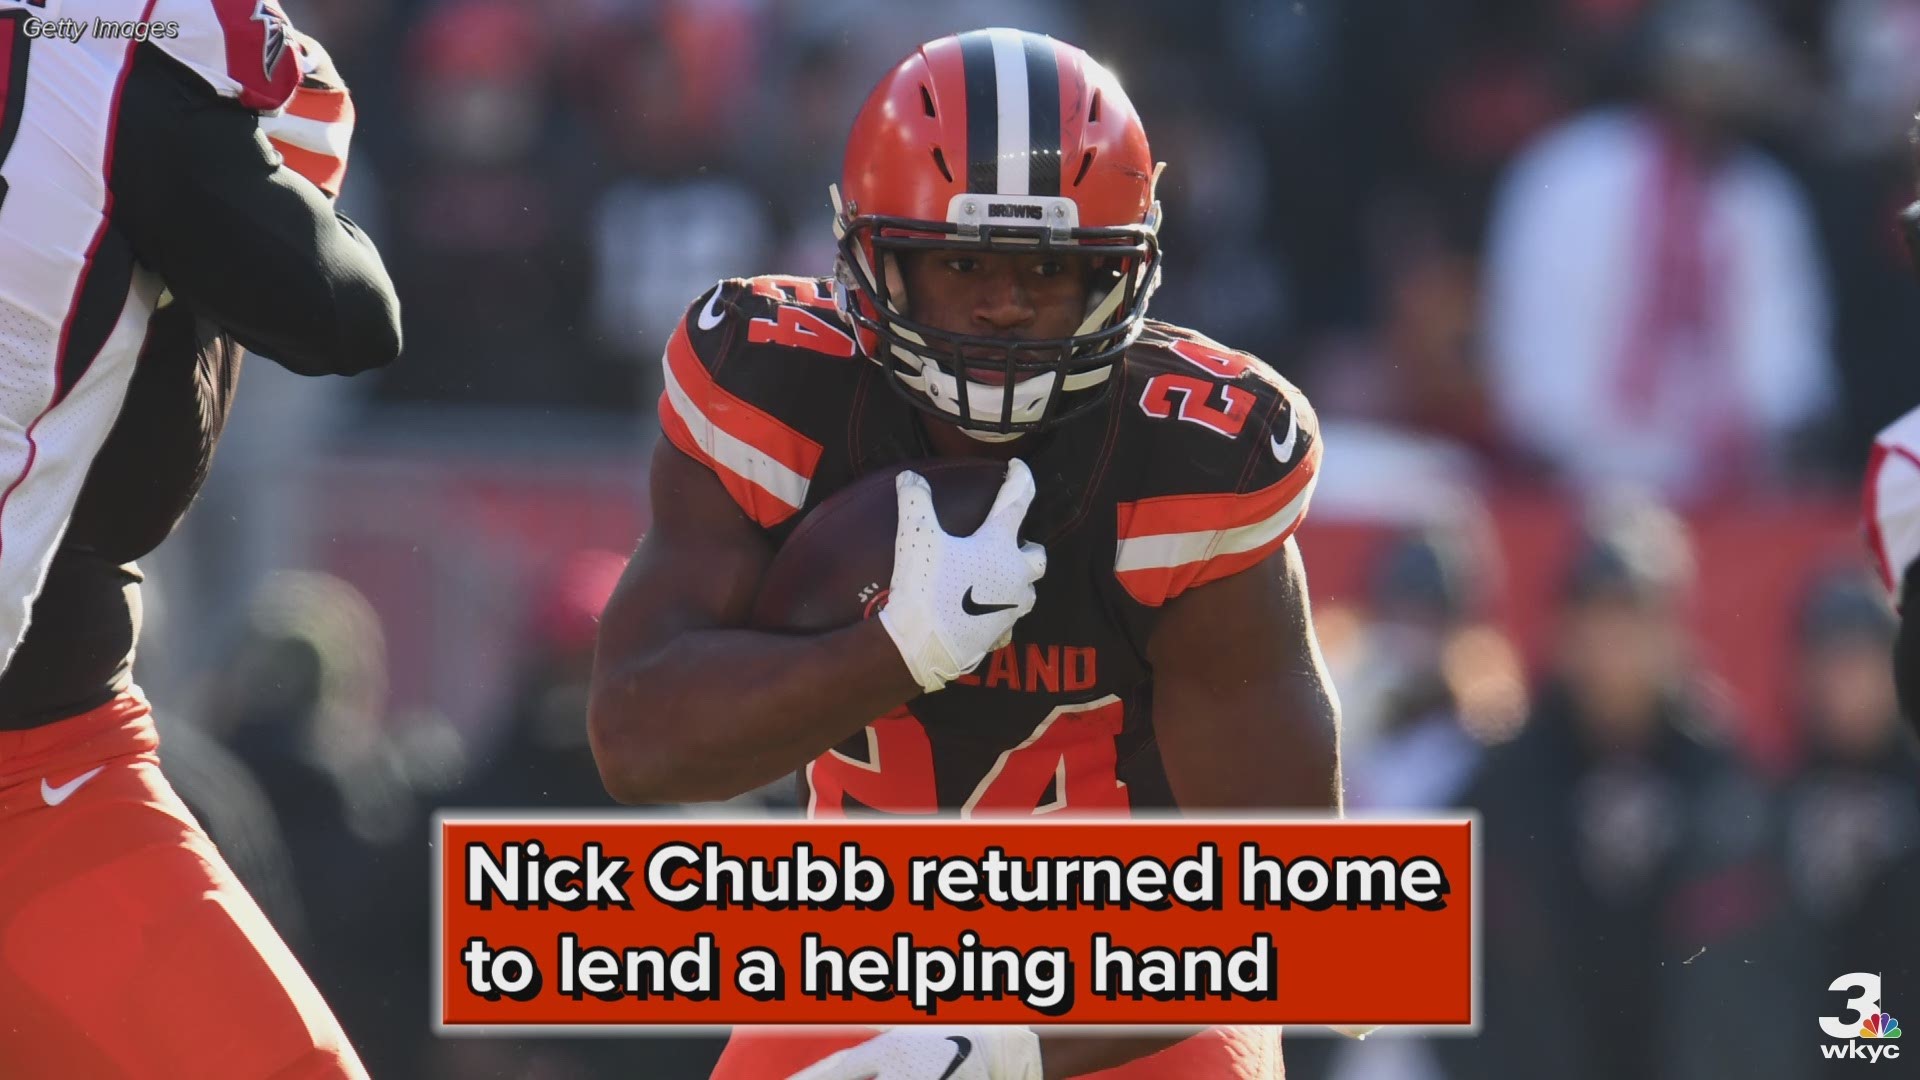 Cleveland Browns running back Nick Chubb returned to Atlanta, Georgia to help fight youth homelessness.